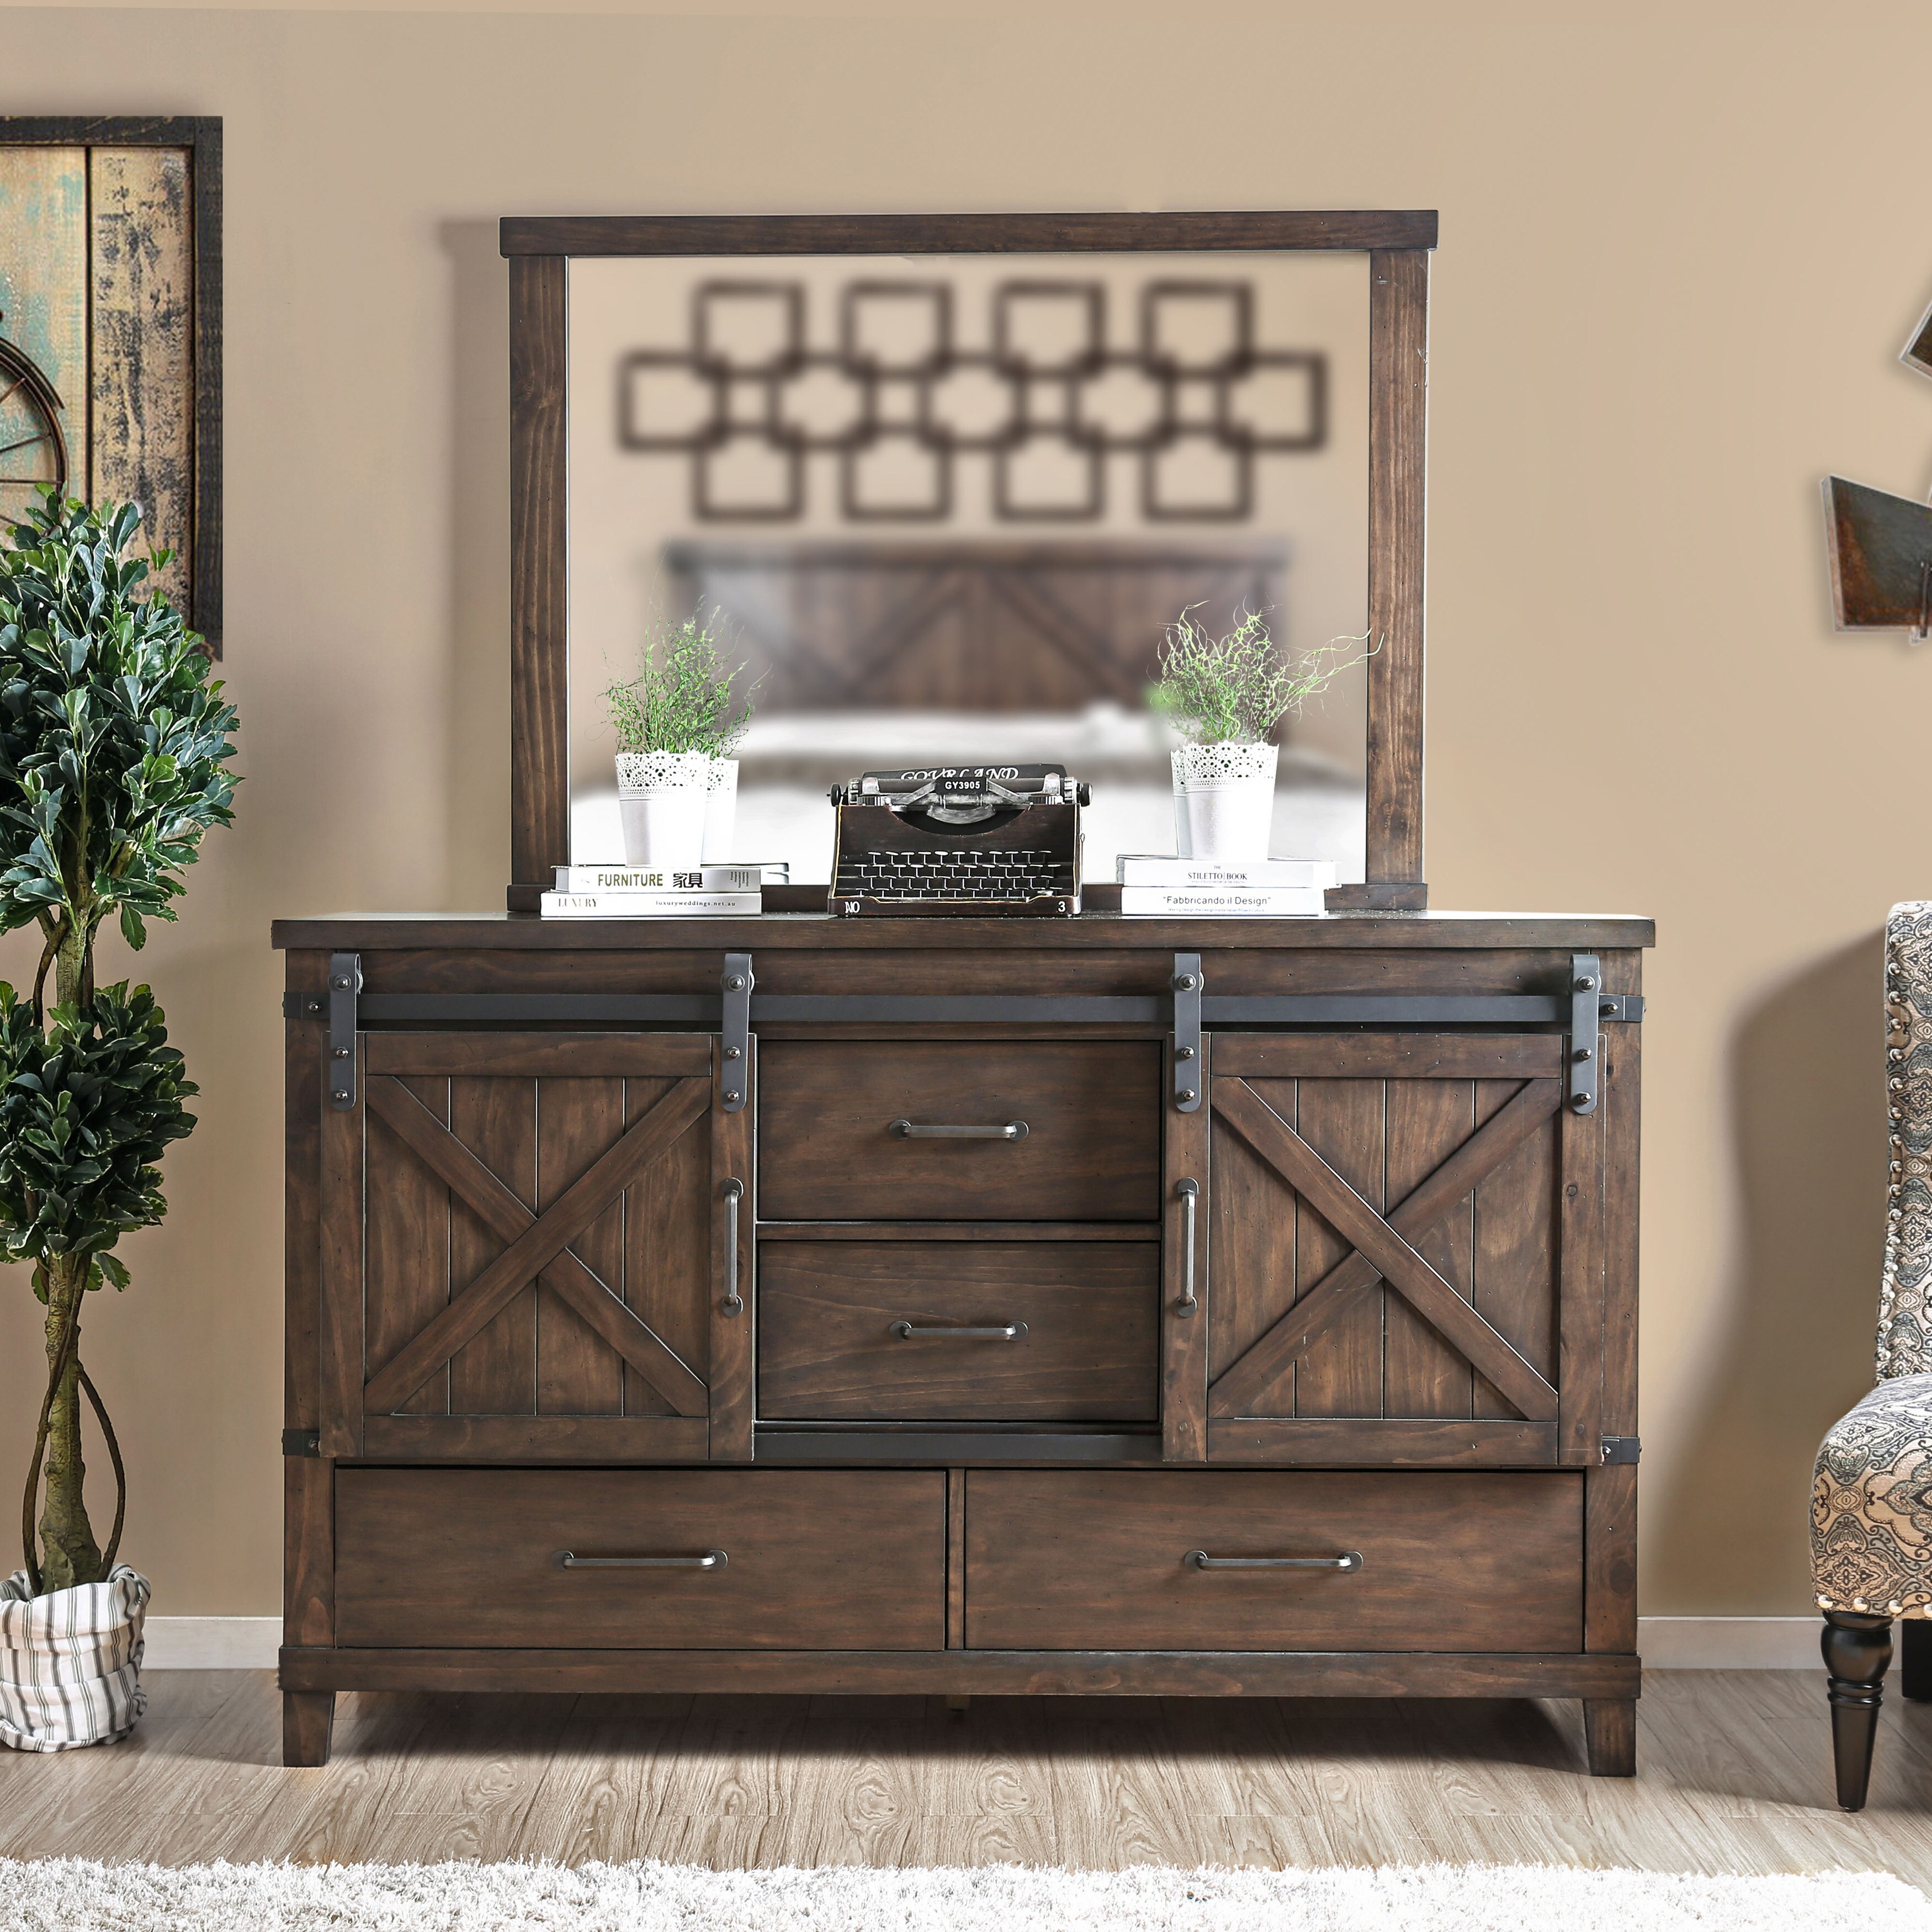 Buy Acacia Dark Wood Dressers Chests Online At Overstock Our